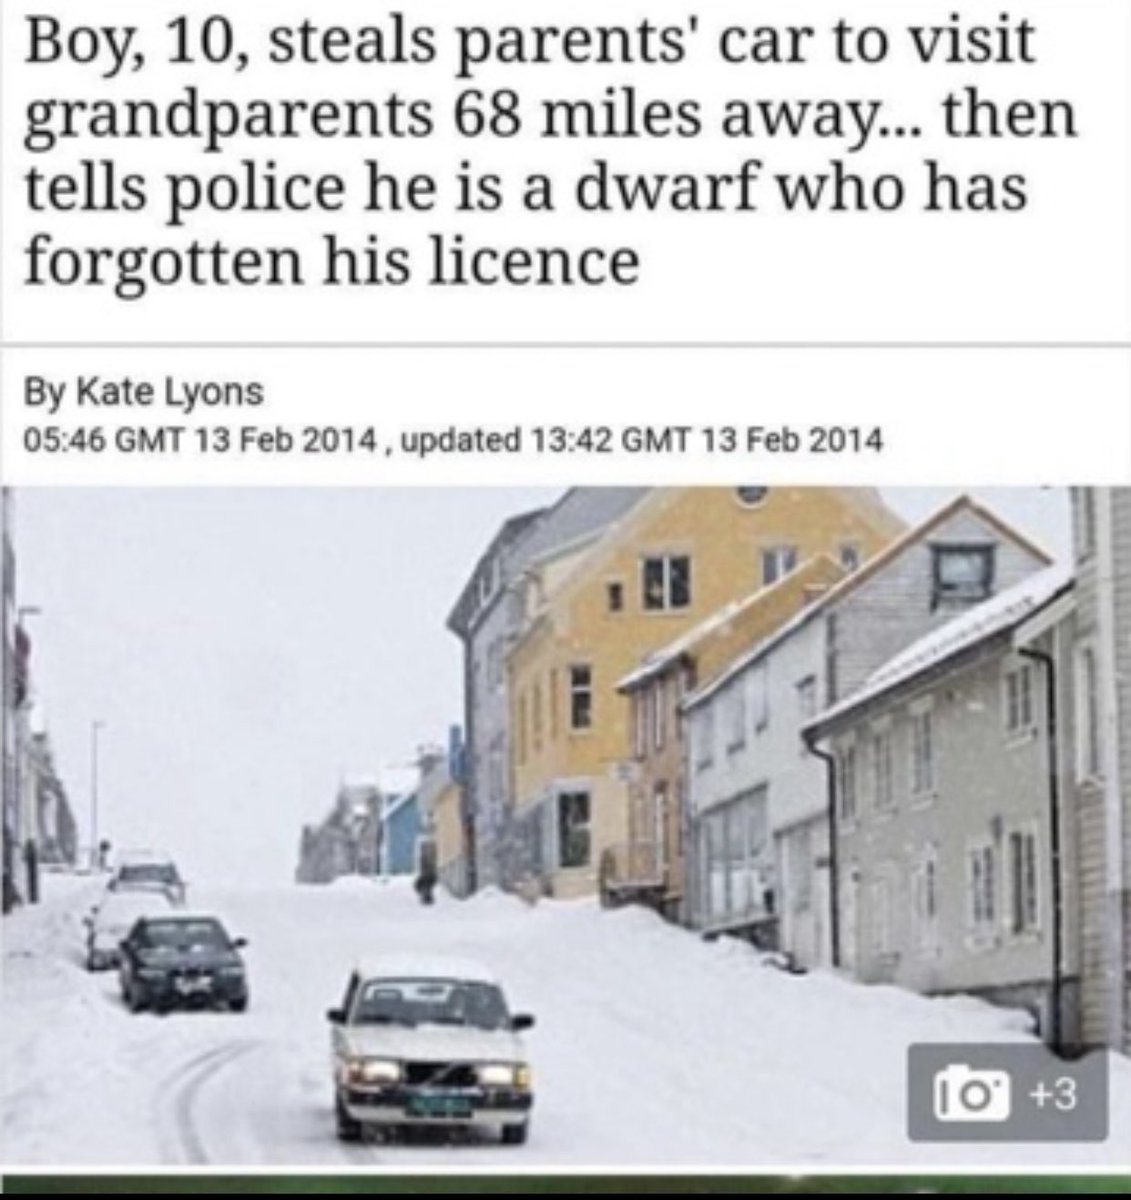 dudes posting their w's - snow - Boy, 10, steals parents' car to visit grandparents 68 miles away... then tells police he is a dwarf who has forgotten his licence By Kate Lyons Gmt , updated Gmt 3